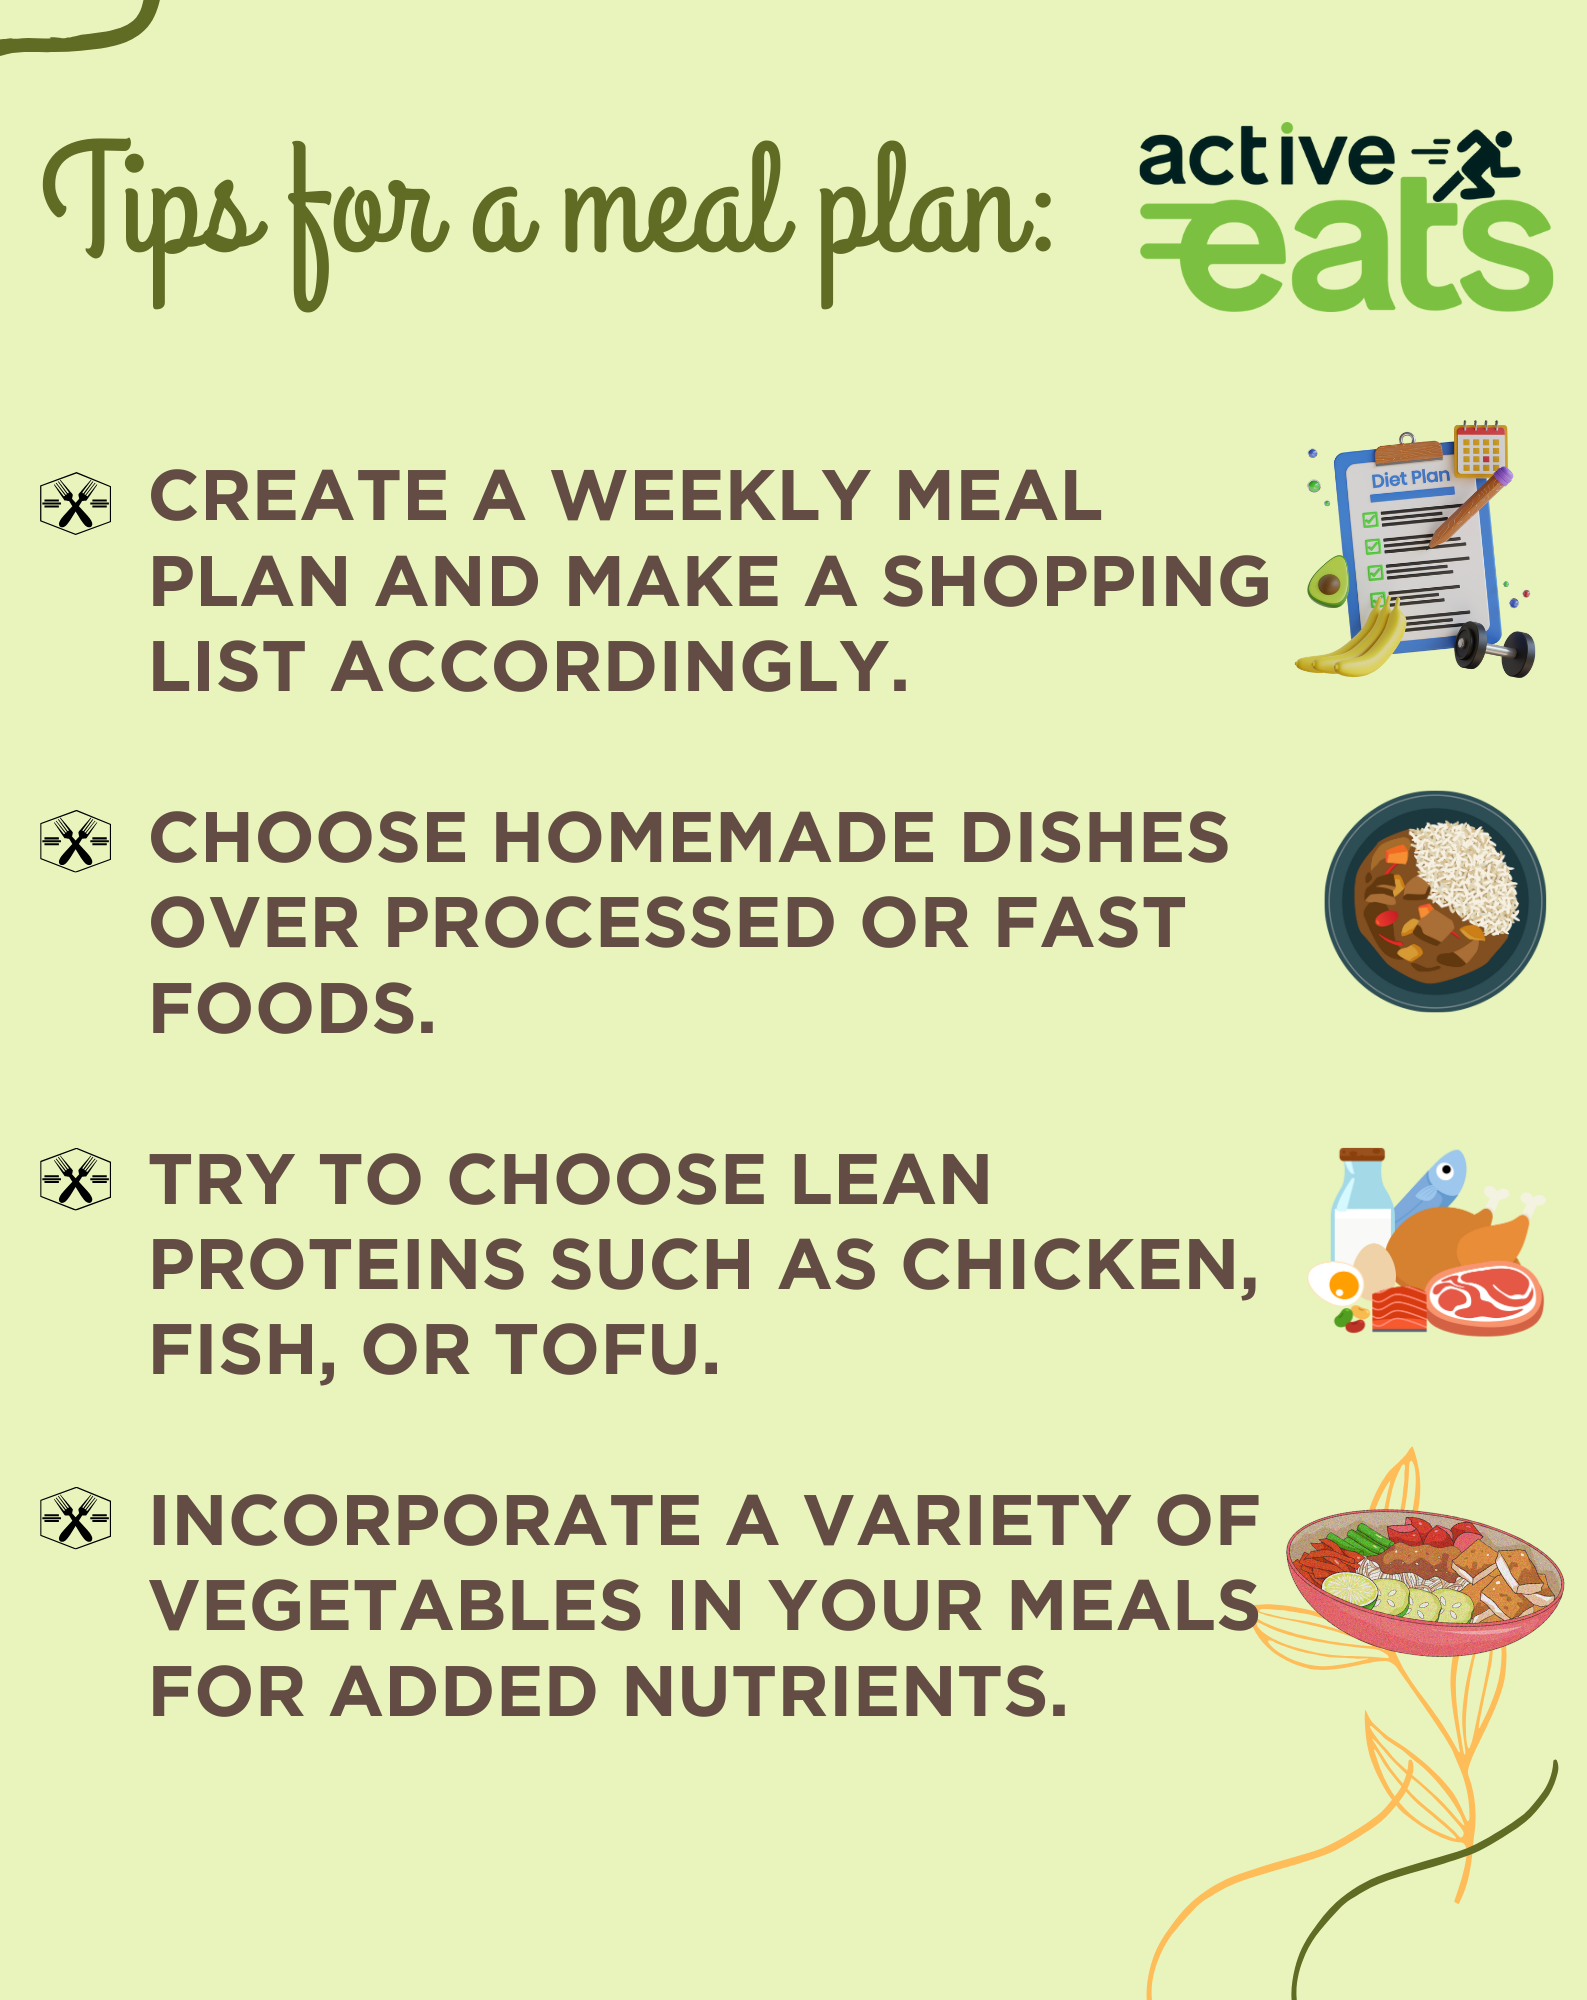 Basic tips to consider while planning a healthy meal.